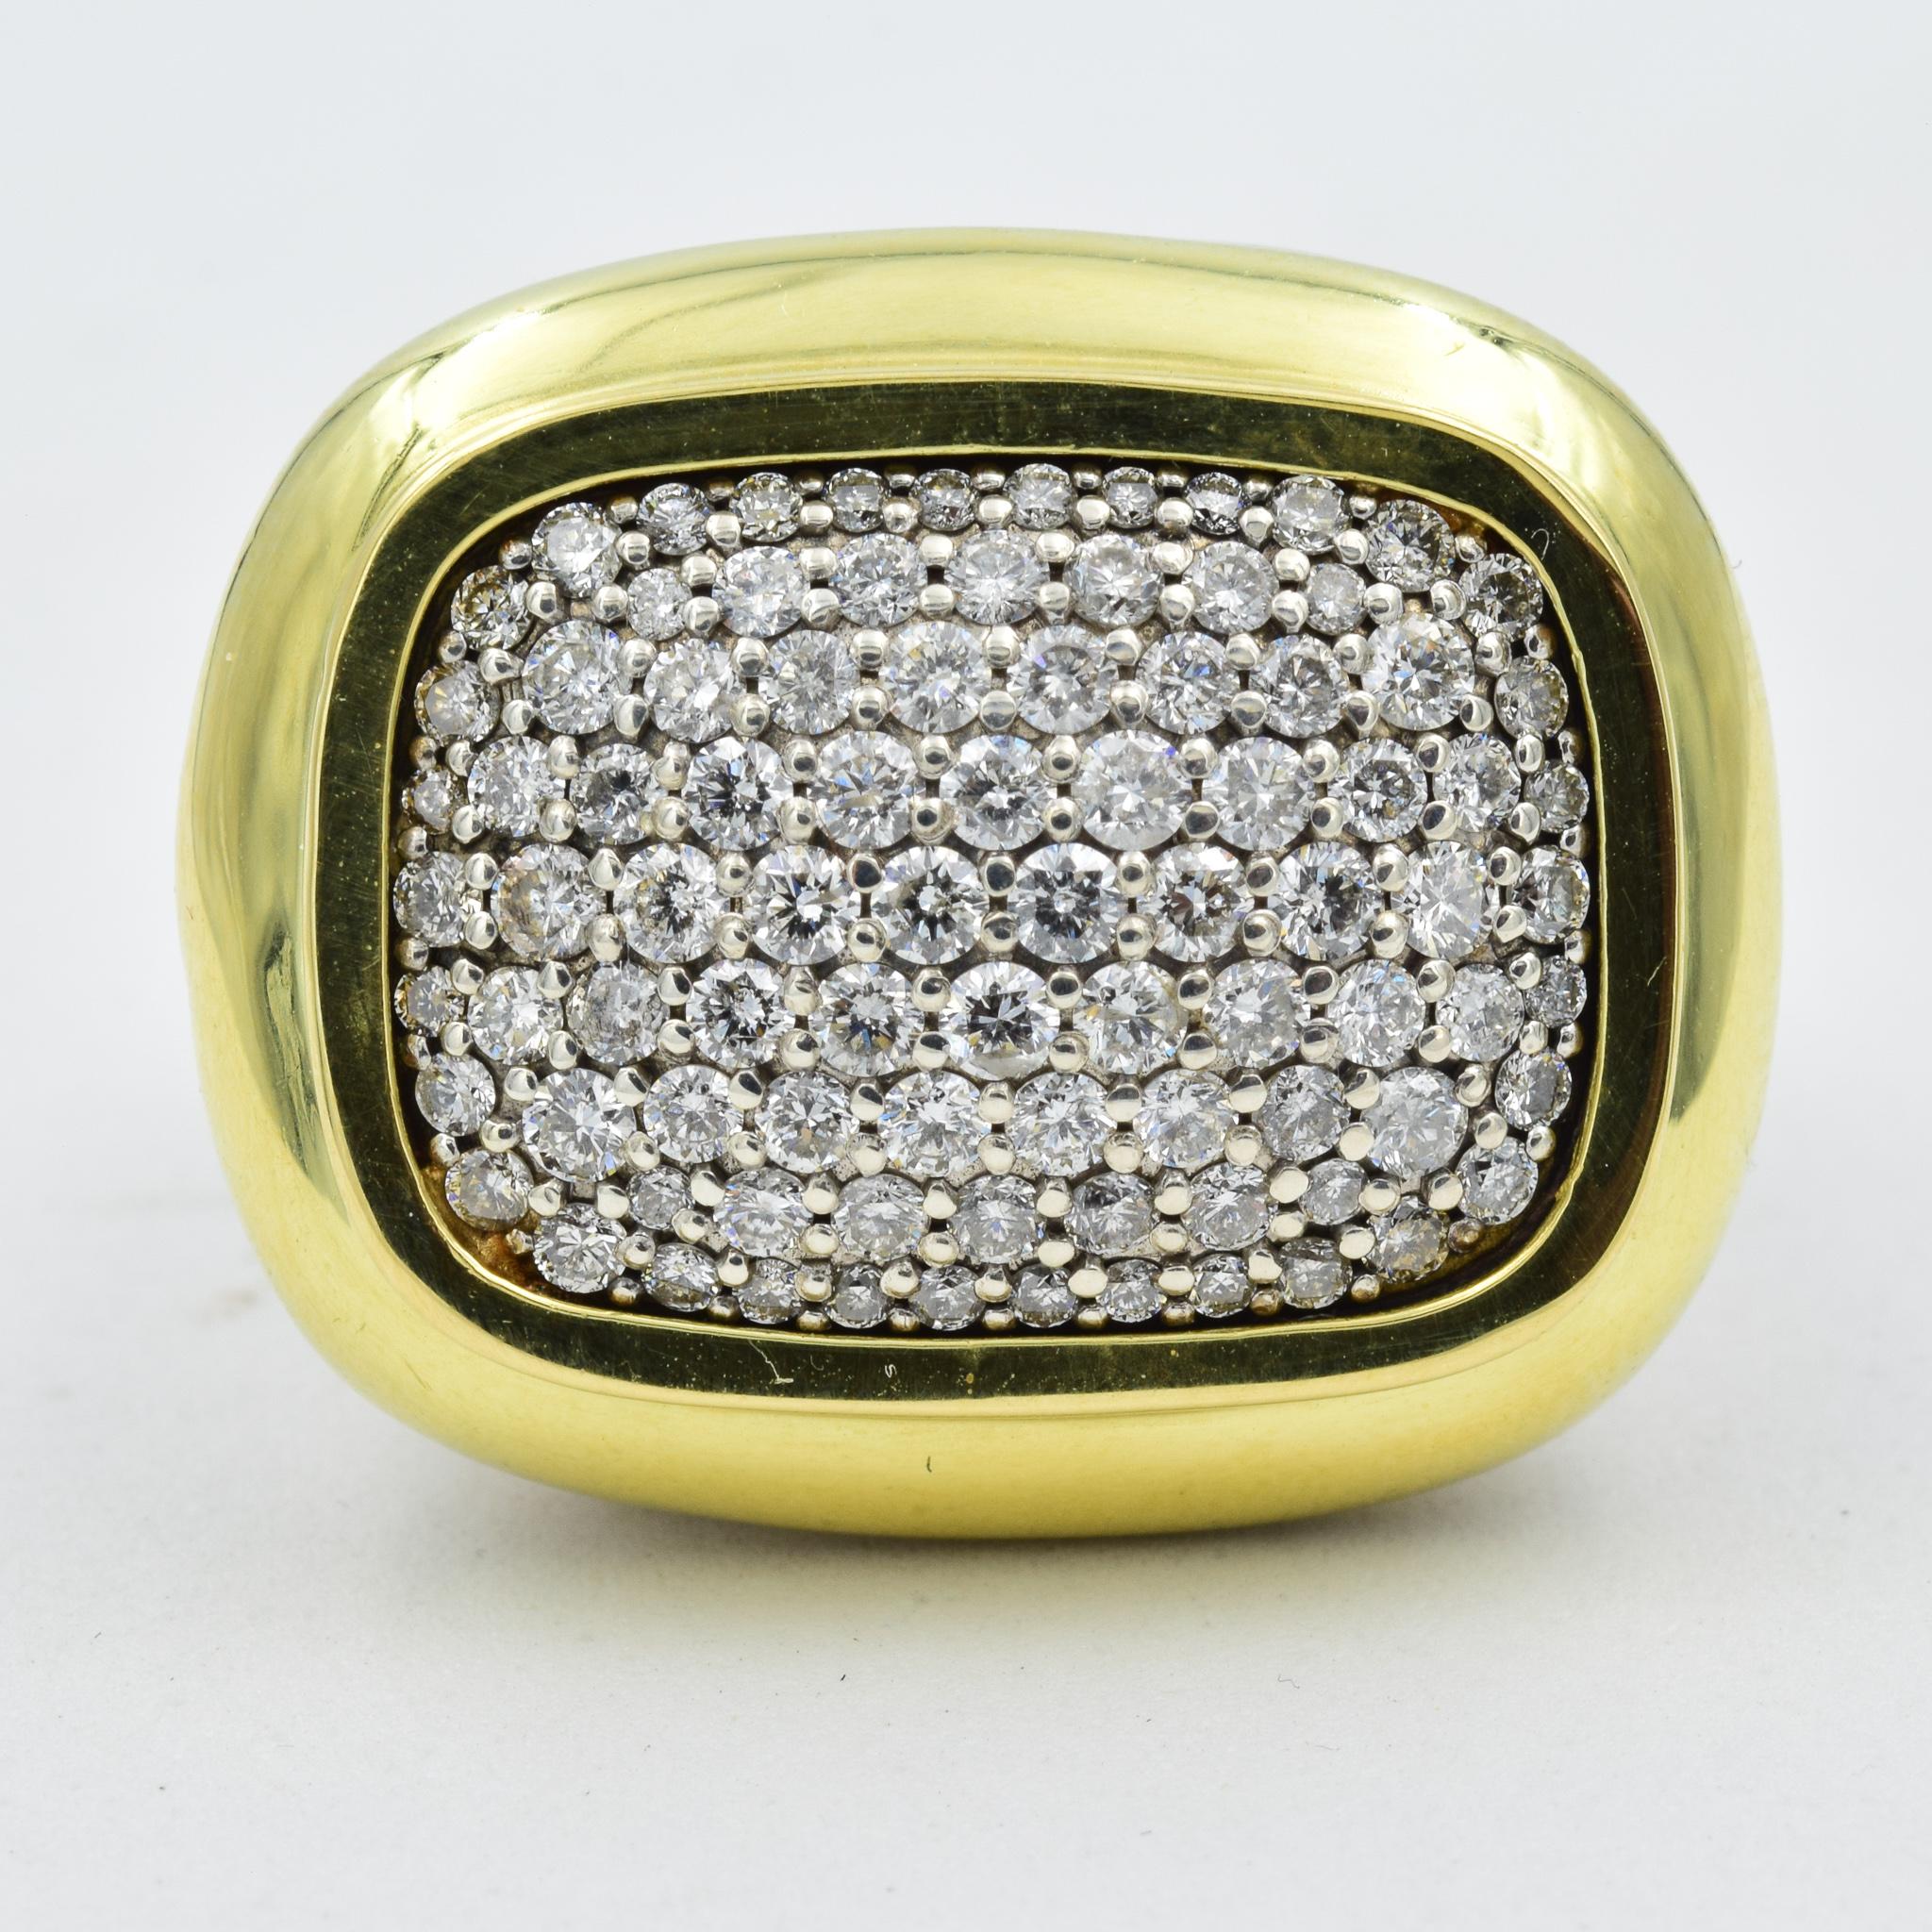 This ring was recently traded in to the store and is a beautiful David Yurman cocktail ring.  This ring has a nice width to it to be worn casually or dressed up as a fun fashion statement.  The cable wrap design through the shank has the DY appeal